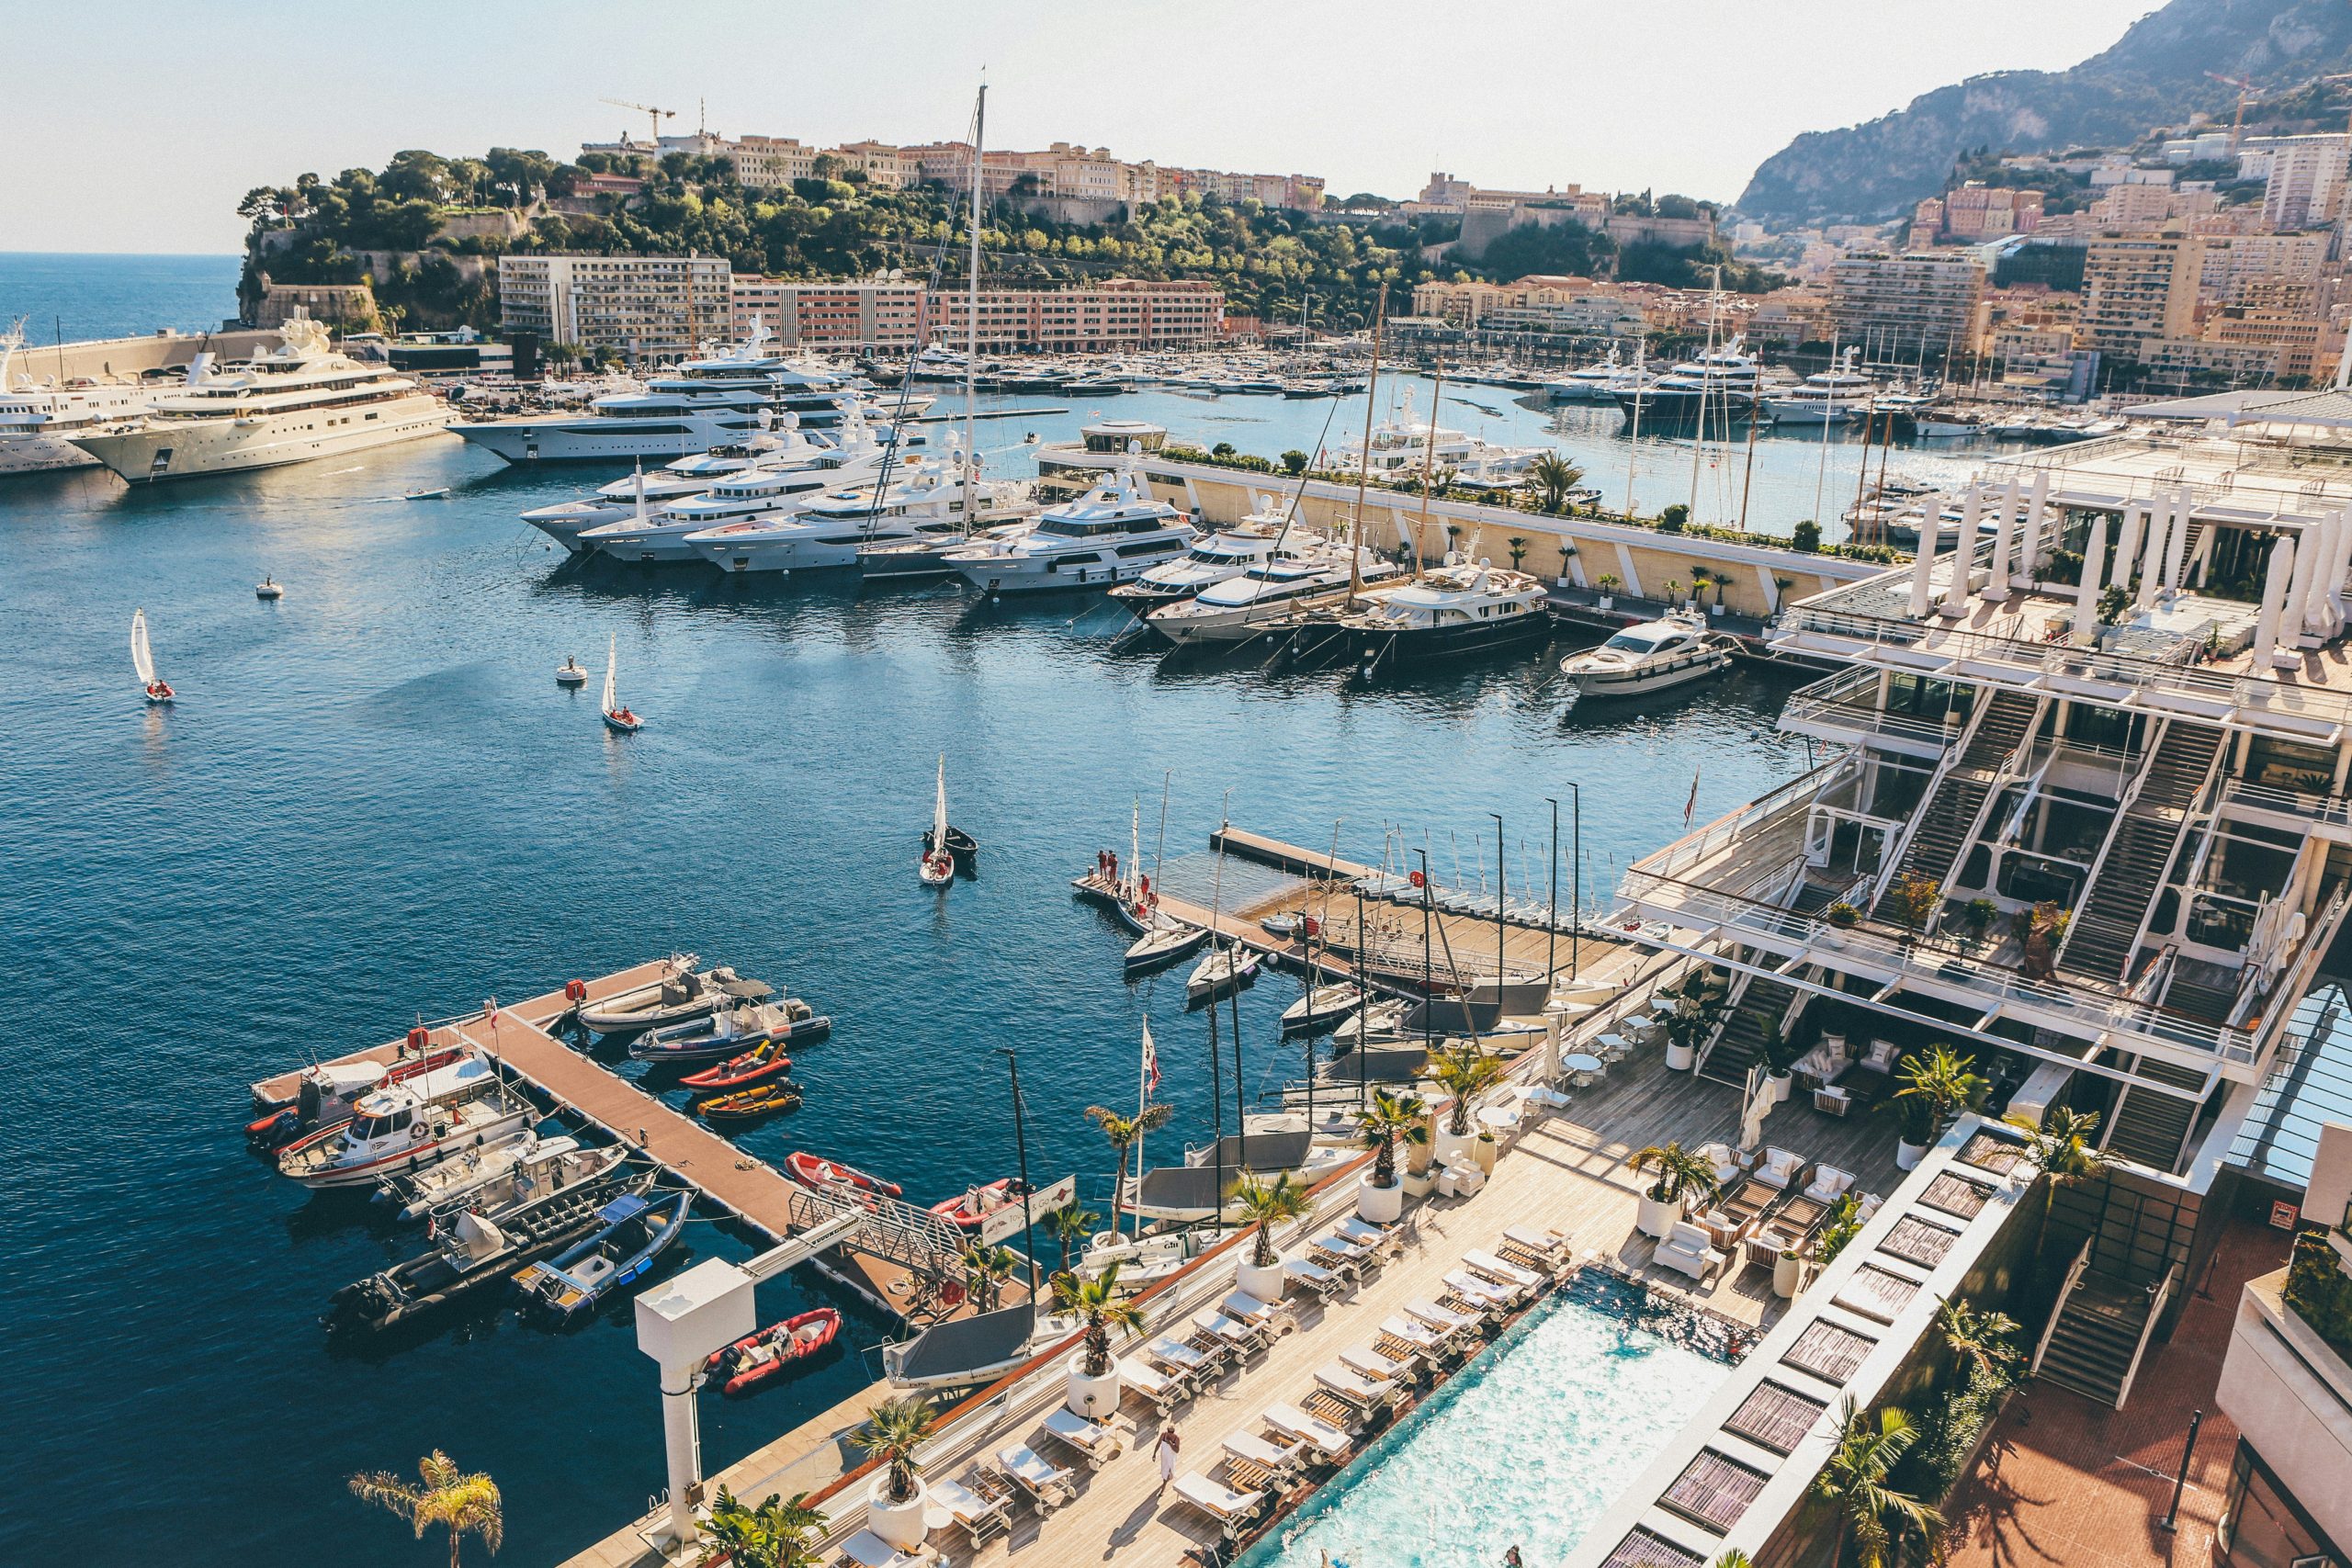 discover the glamour and beauty of monaco, with its stunning coastline, luxurious hotels, and prestigious monte carlo casino.